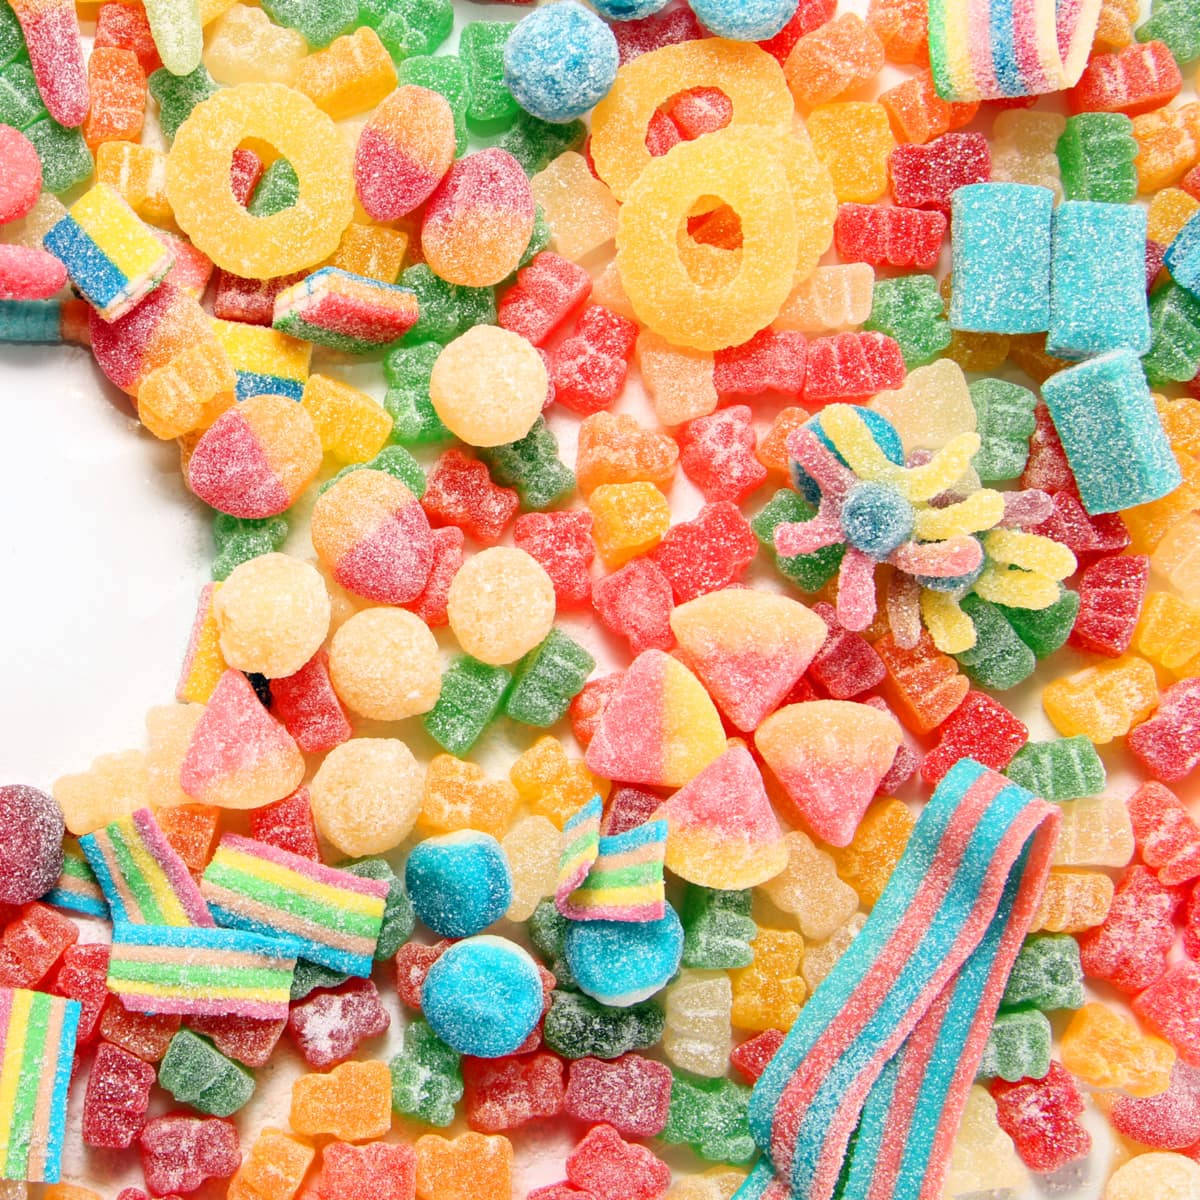 Download Selection Of Delicious Sour Candies Wallpaper | Wallpapers.com